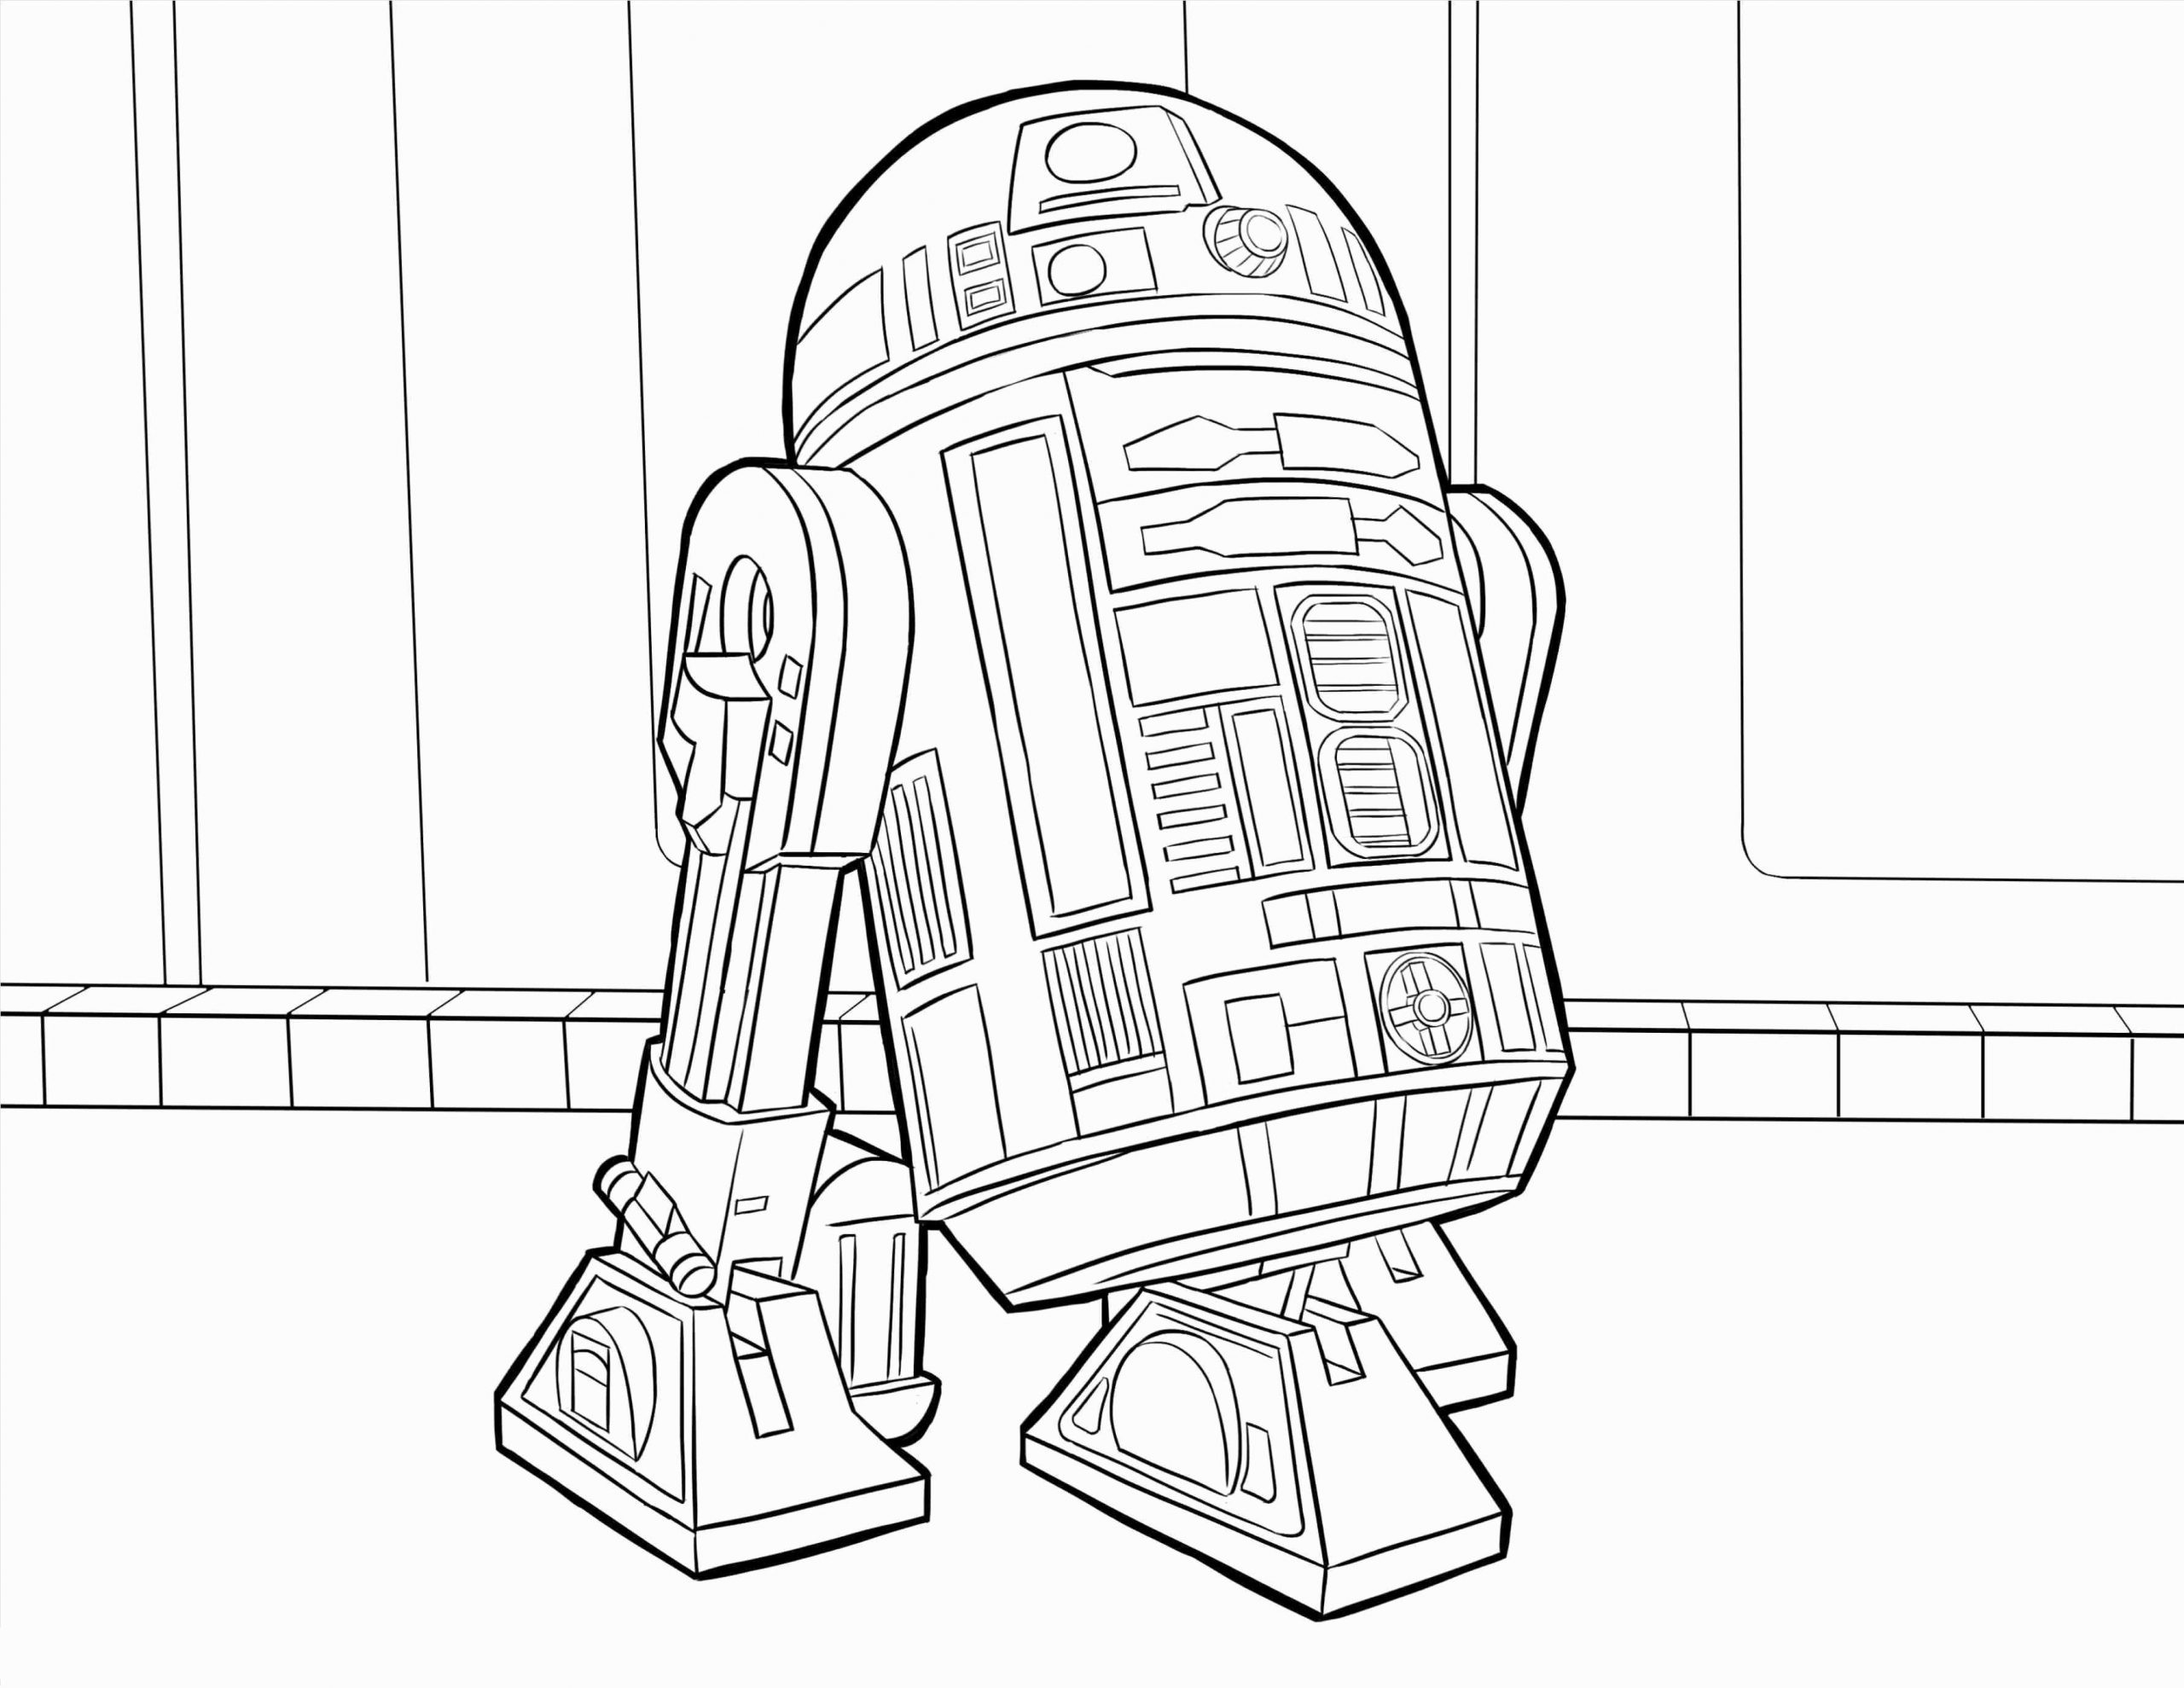 Coloring Pages : R2d2ring Pages Best For Kids Free Splendi And Printable 48  Splendi R2d2 Coloring Pages ~ Off-The Wall ATL